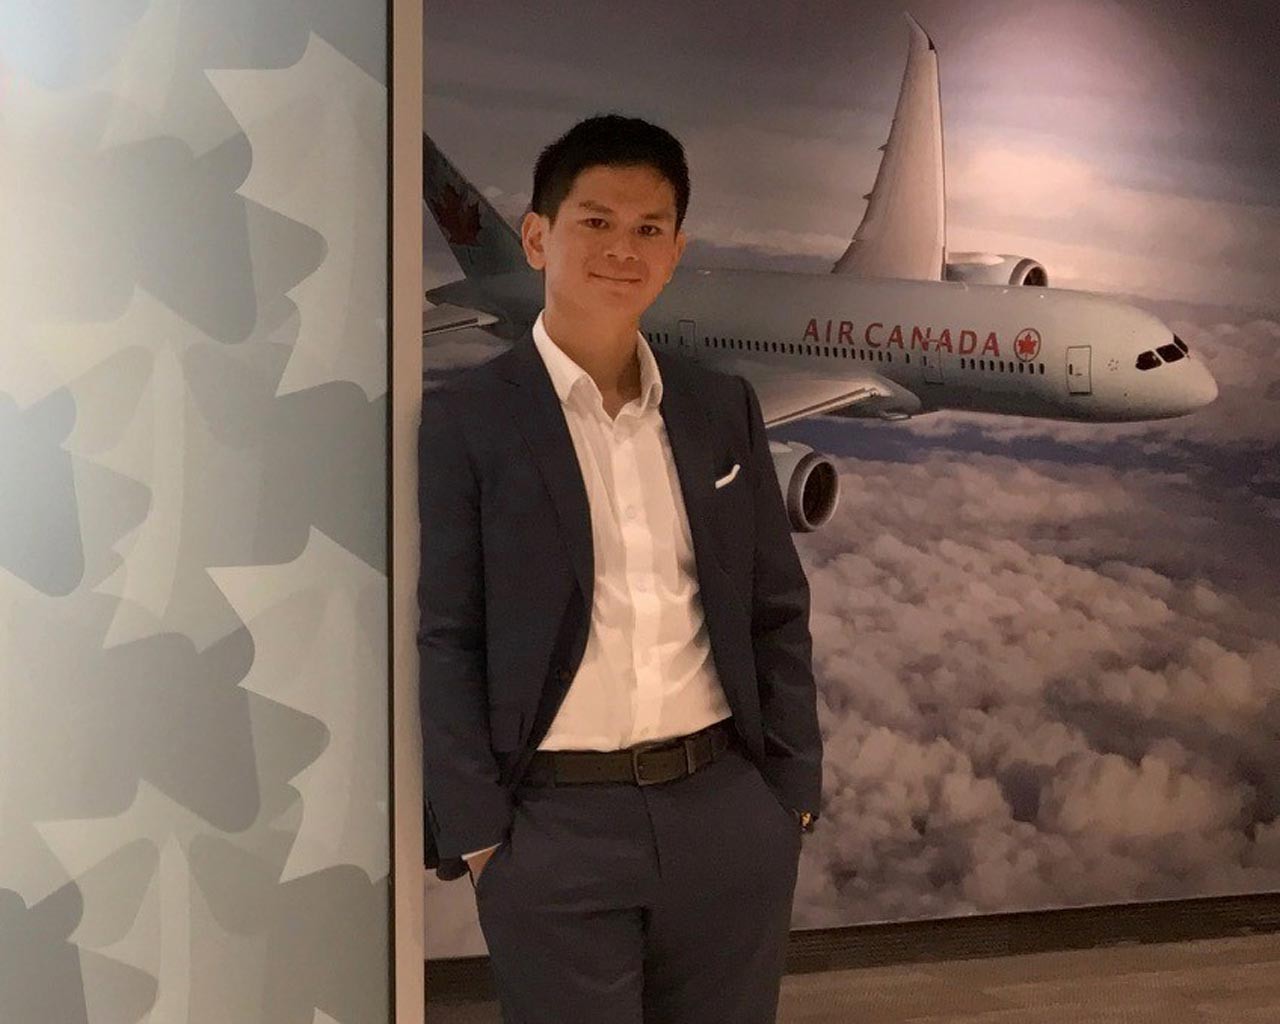 Flying high with Air Canada